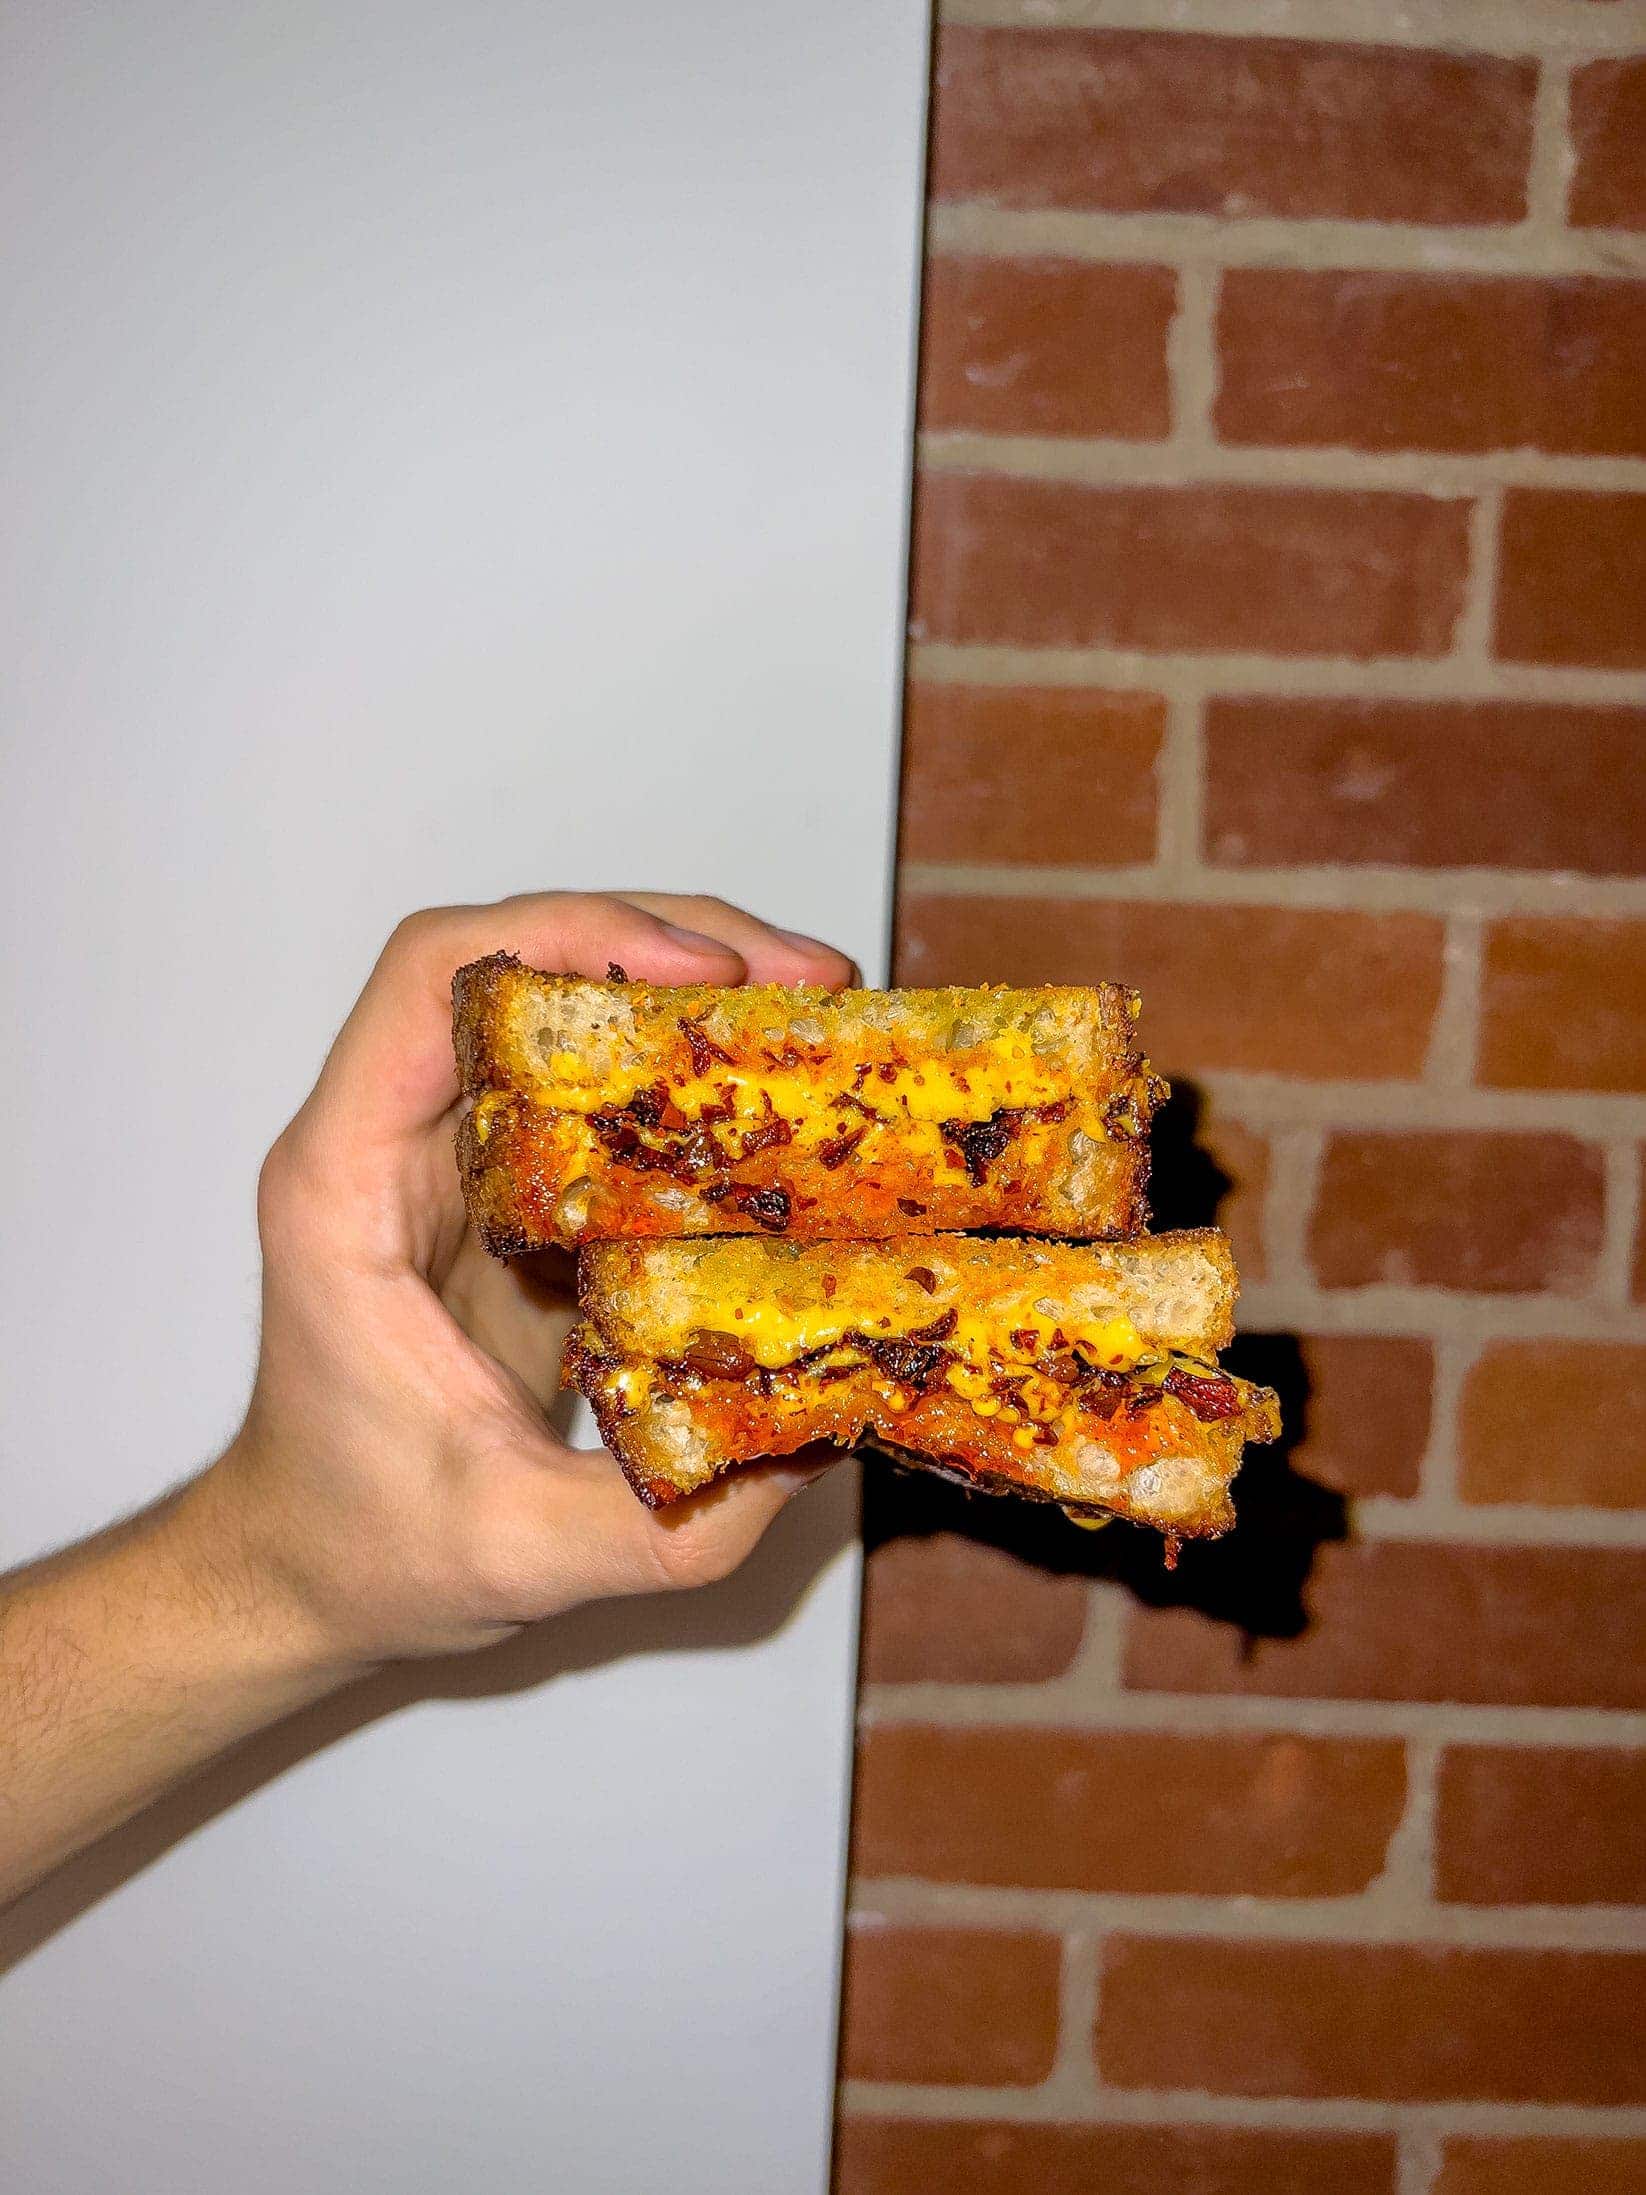 VIETNAMESE CHILI GRILLED CHEESE